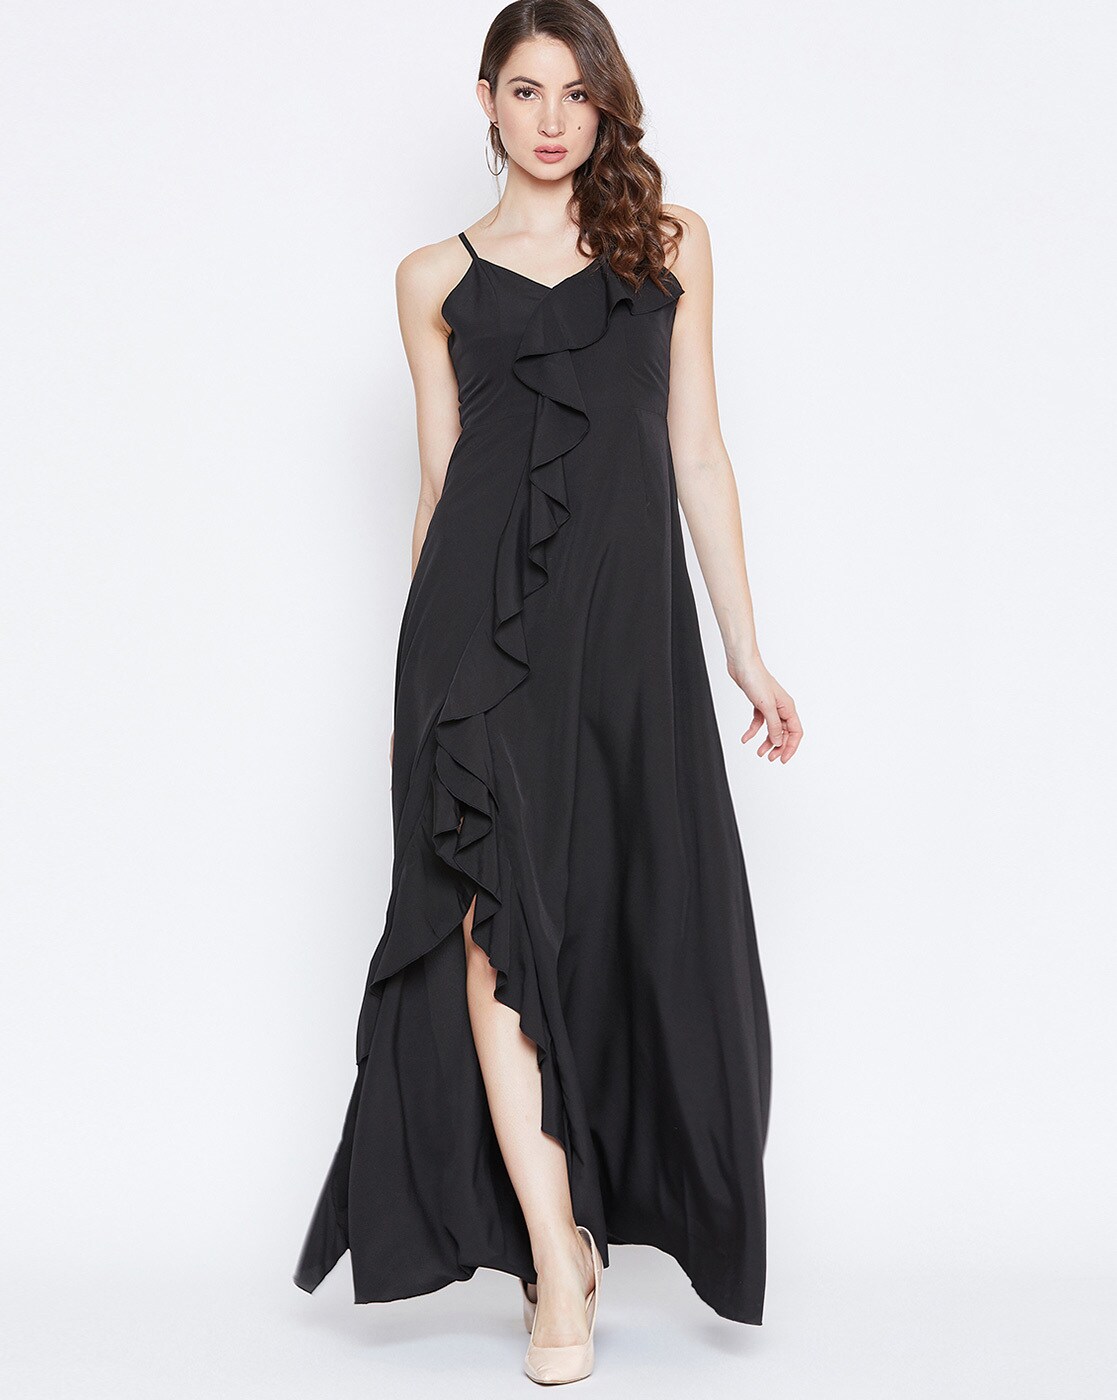 Buy Berrylush Maxi Dresses with Slit online - Women - 14 products |  FASHIOLA.in